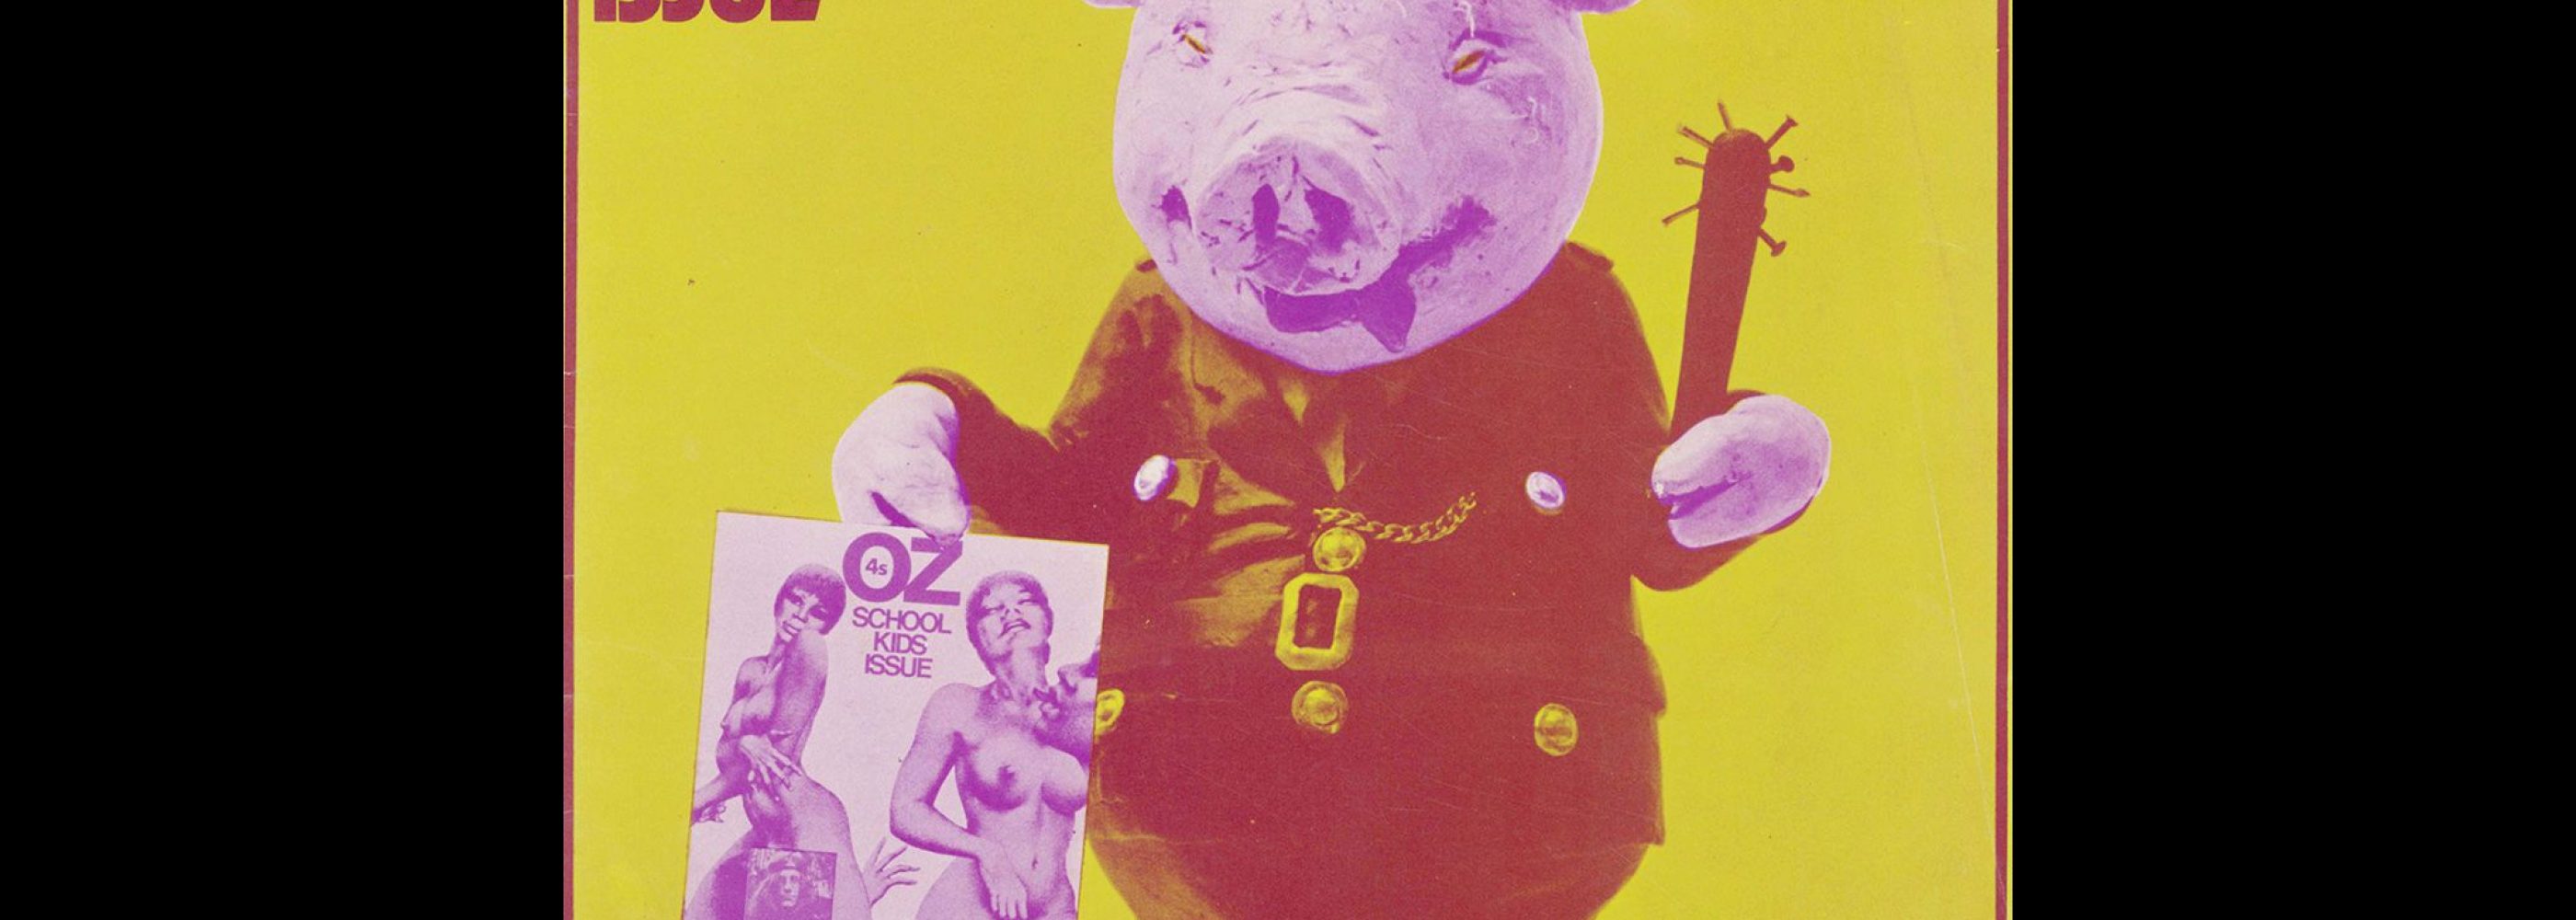 OZ Magazine, No 35, May 1971. Cover design by Ed Belchamber